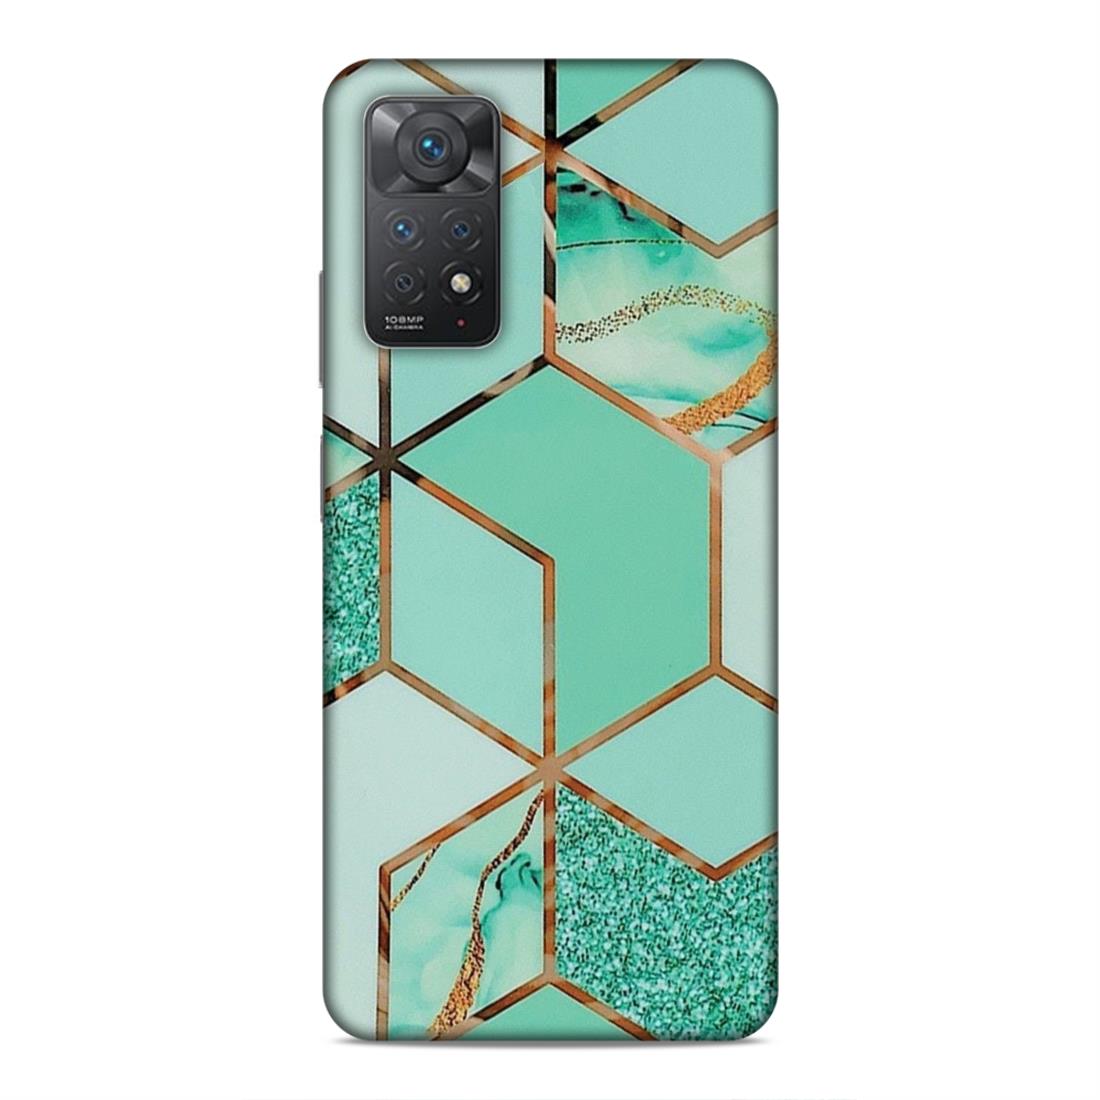 Hexagonal Marble Pattern Hard Back Case For Xiaomi Redmi Note 11 Pro 4G / 5G / Note 11 Pro Plus 5G